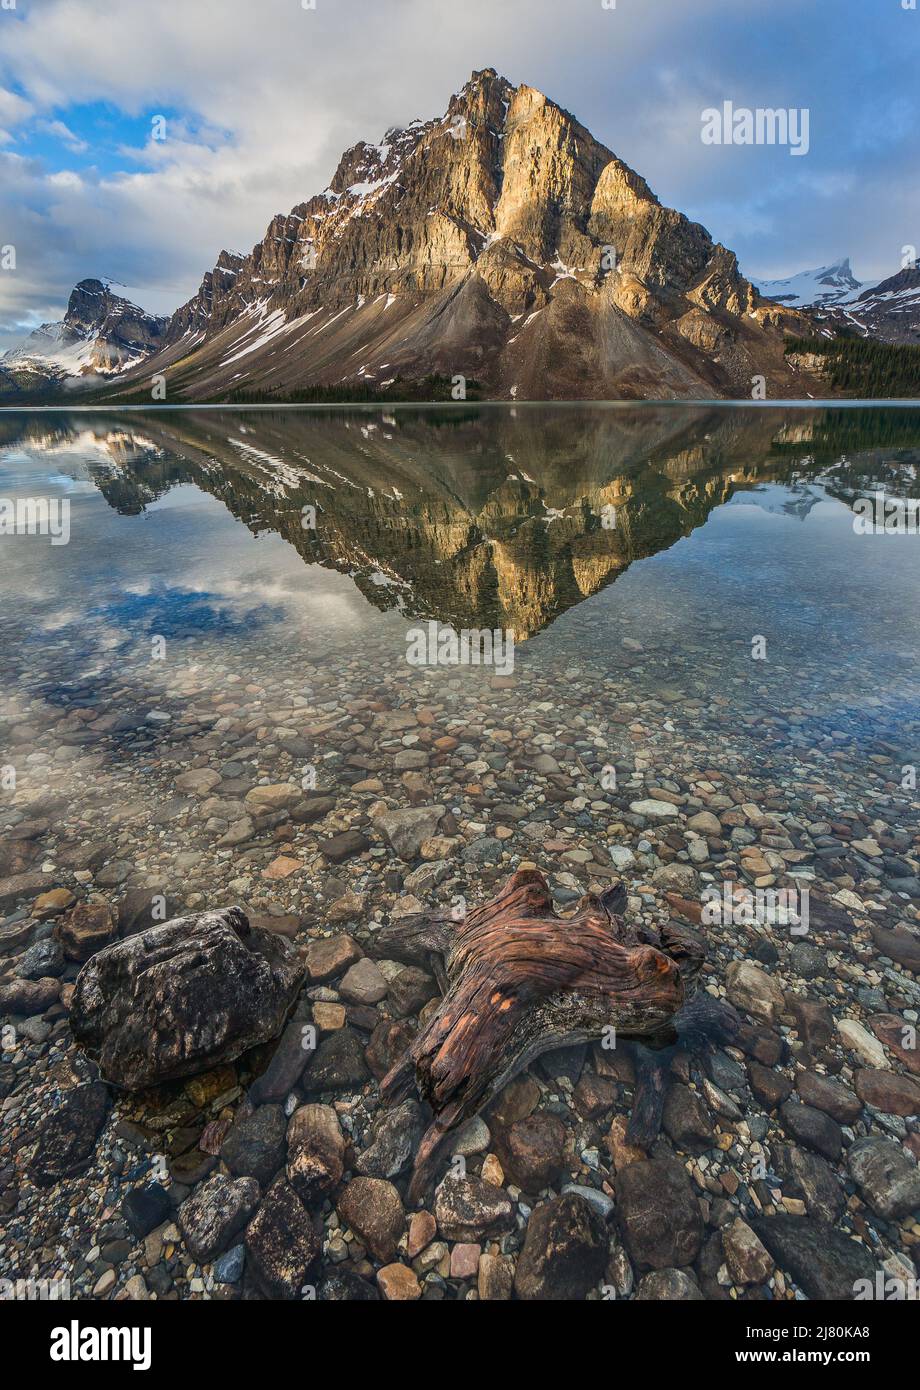 Mt Crowfoot Reflection, lac Bow, Rocheuses canadiennes, parc national Banff, Alberta, Canada Banque D'Images